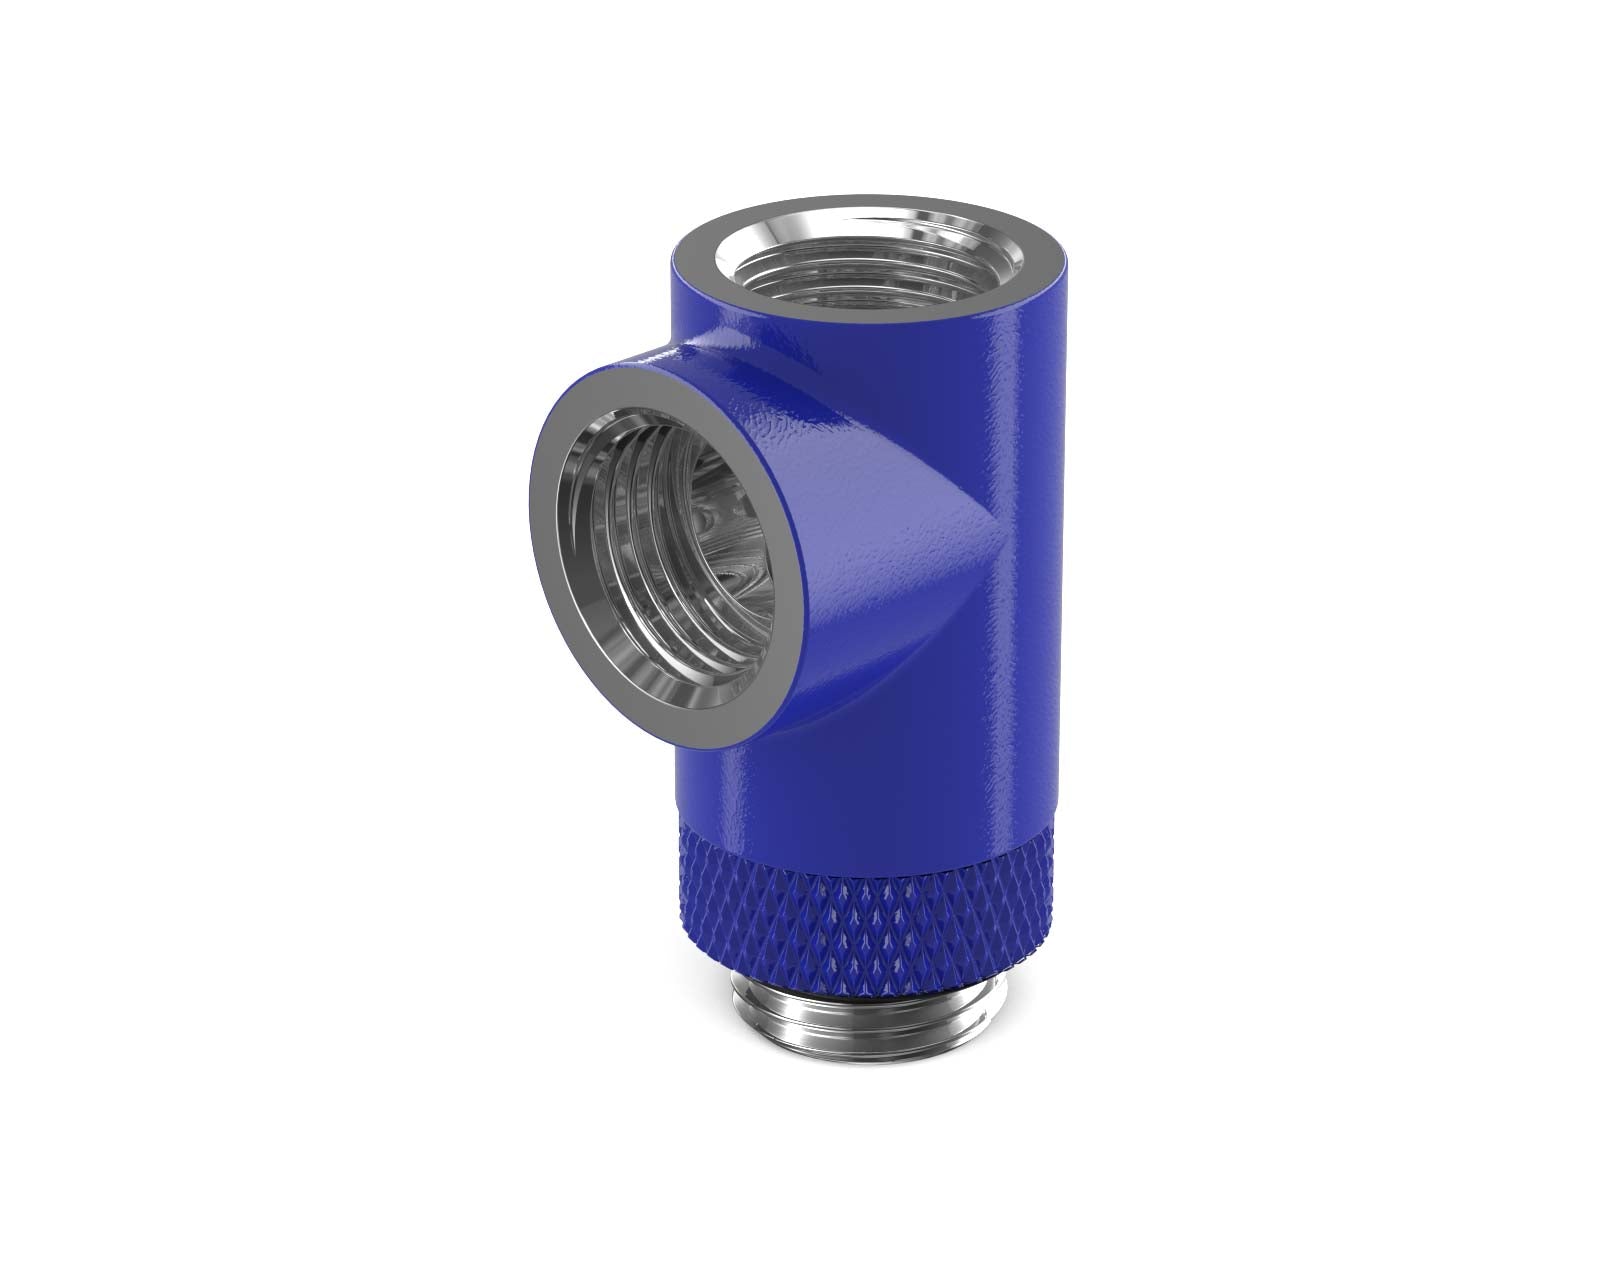 PrimoChill G 1/4in. Inline Rotary 3-Way SX Female T Adapter - PrimoChill - KEEPING IT COOL True Blue